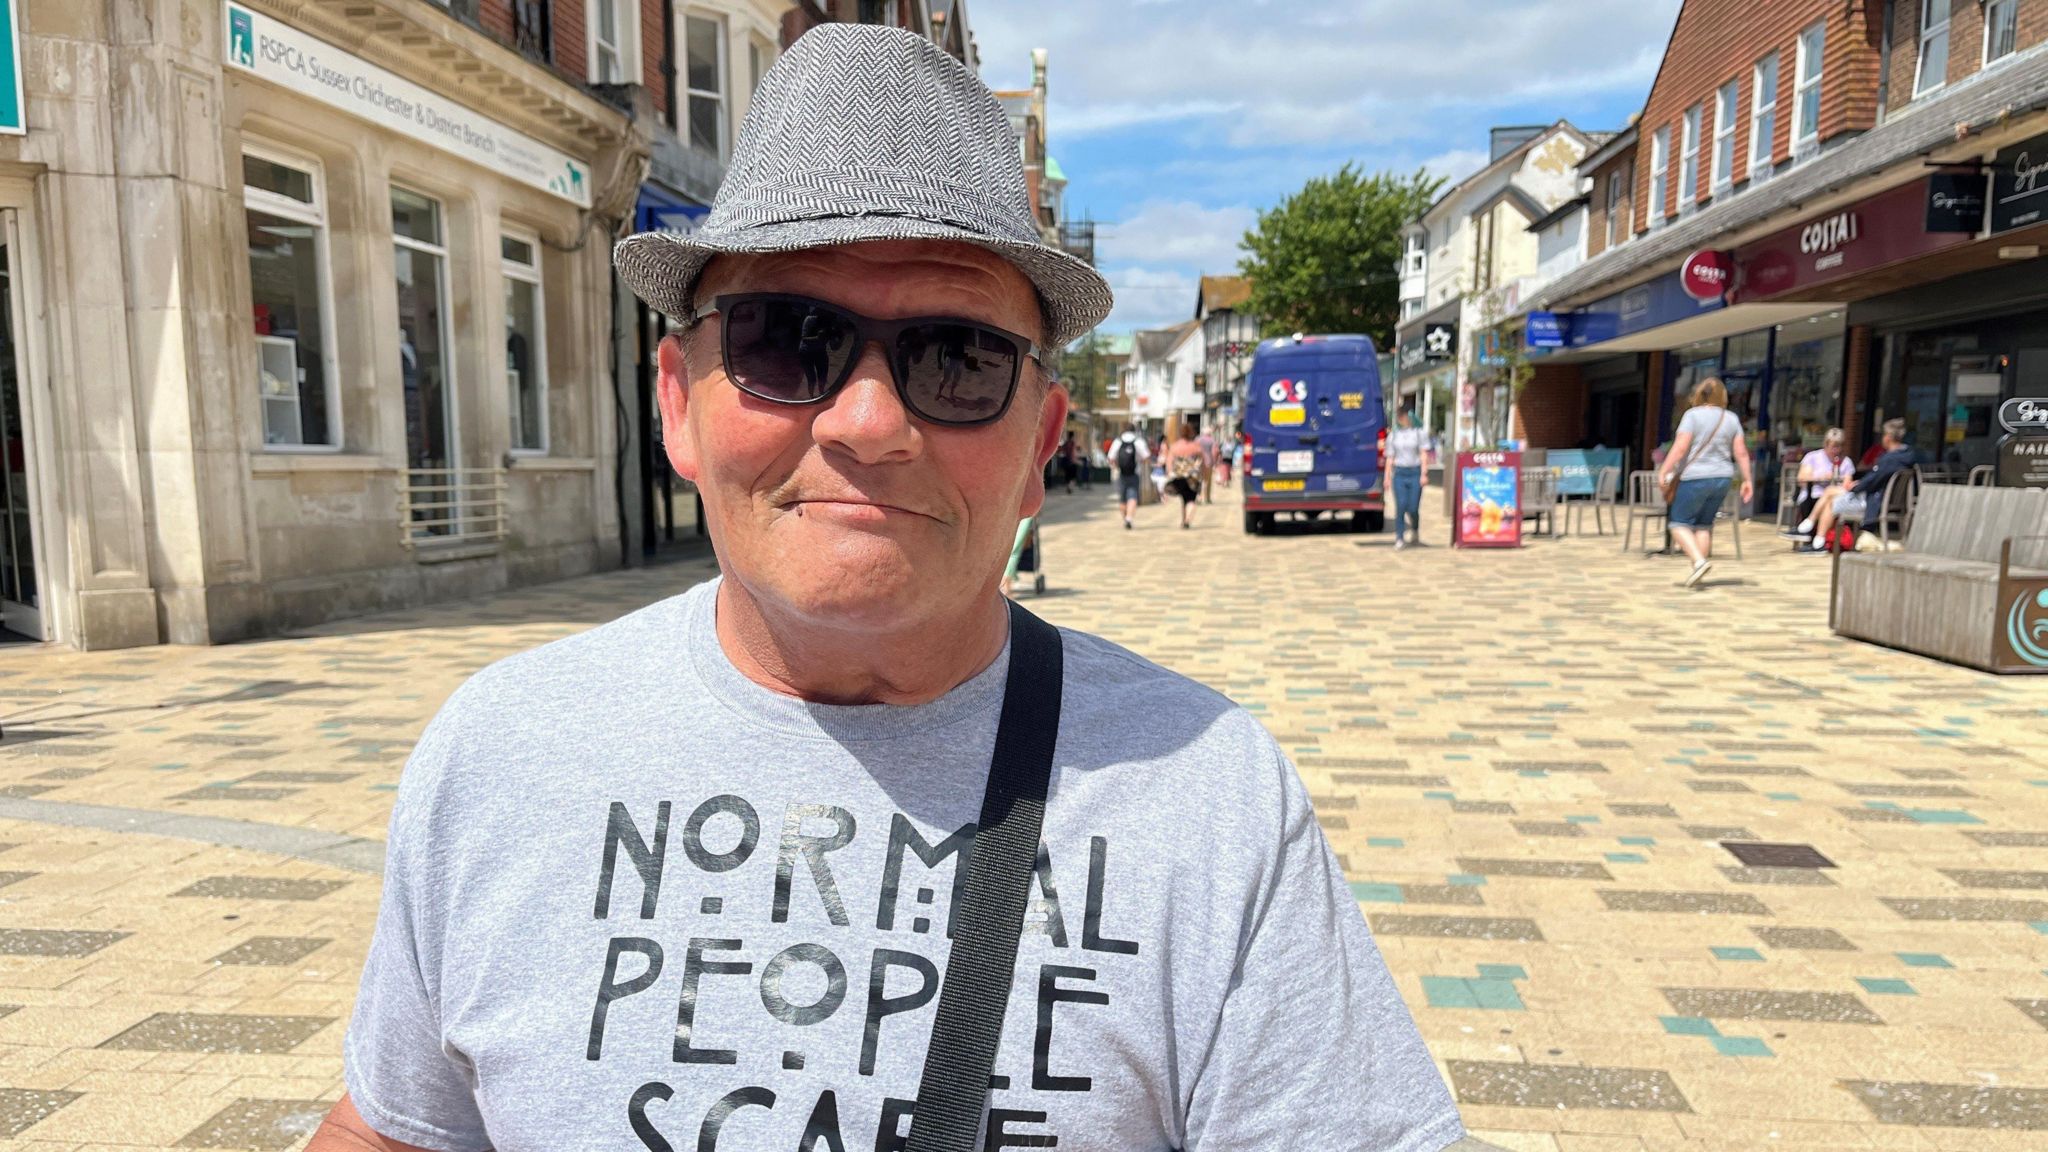 Roger Stevens stands in the town centre wearing a trilby hat and t-shirt